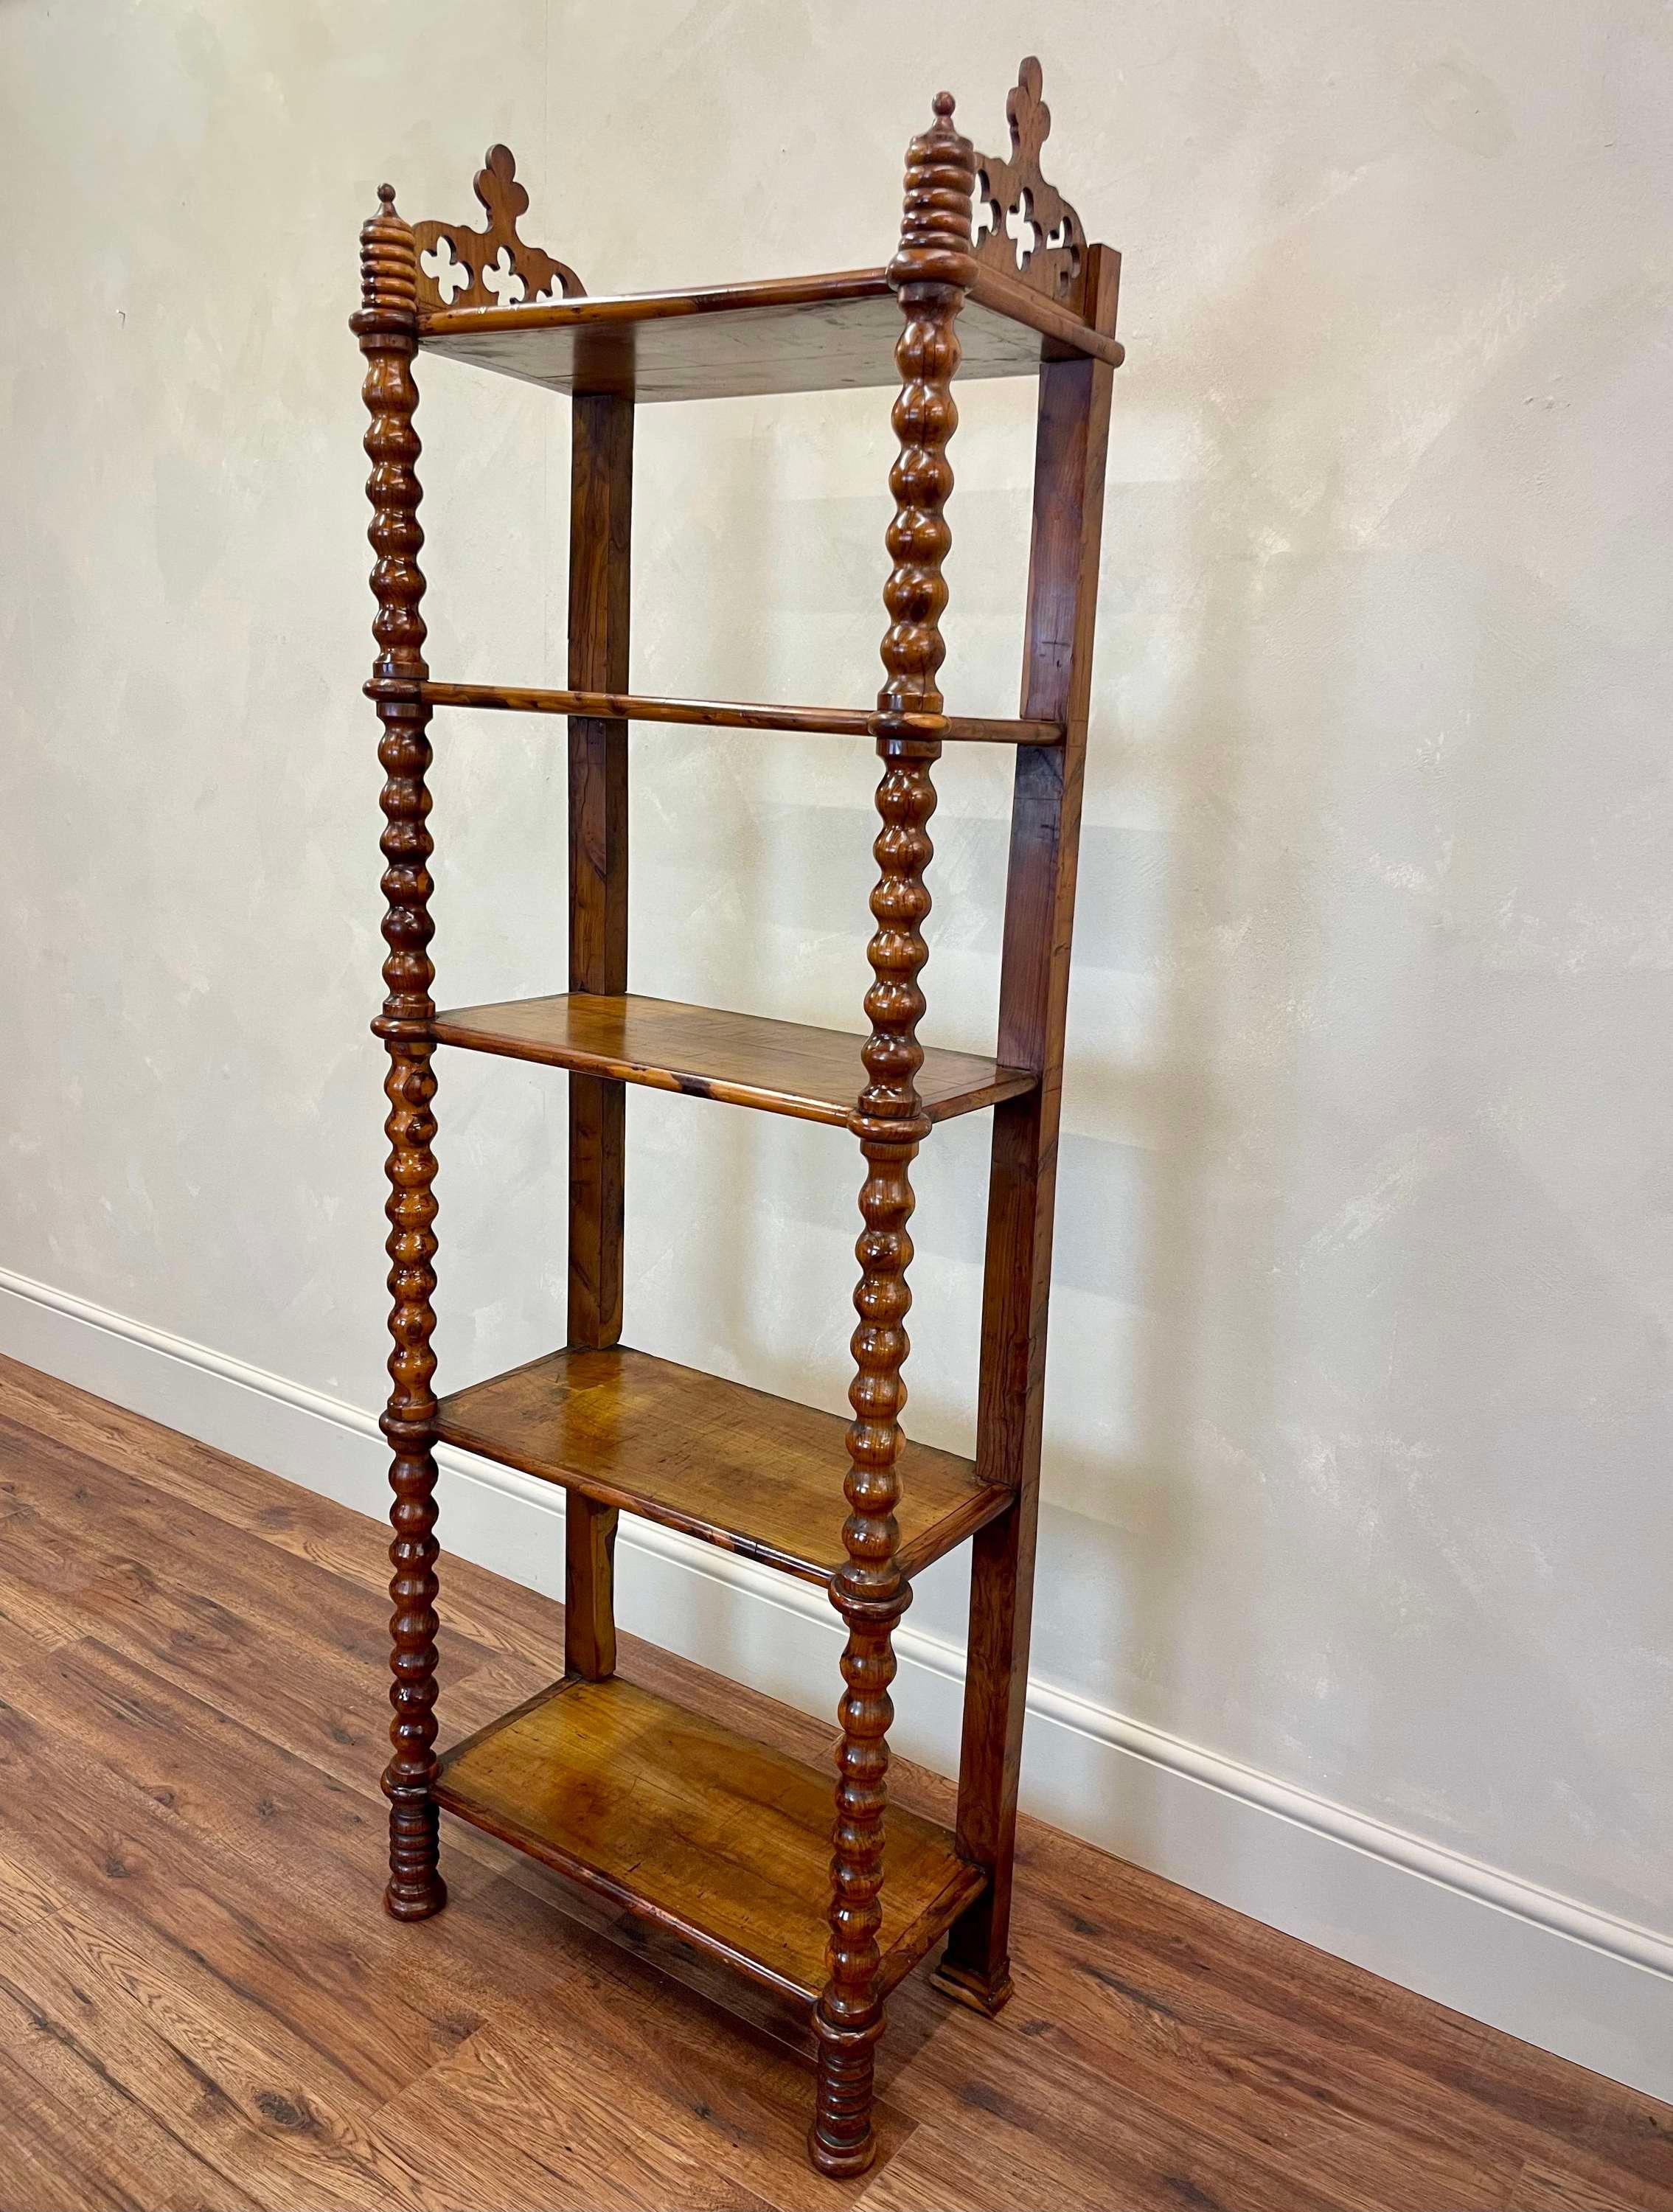 Antique French Shelving Unit in Cherry Wood.
This free-standing etagere / shelving unit has 5, solid cherry wood shelves, with beautifully carved bobbin pillars to each front corner and flat pillars to the back.
To each side of the top shelf, sits